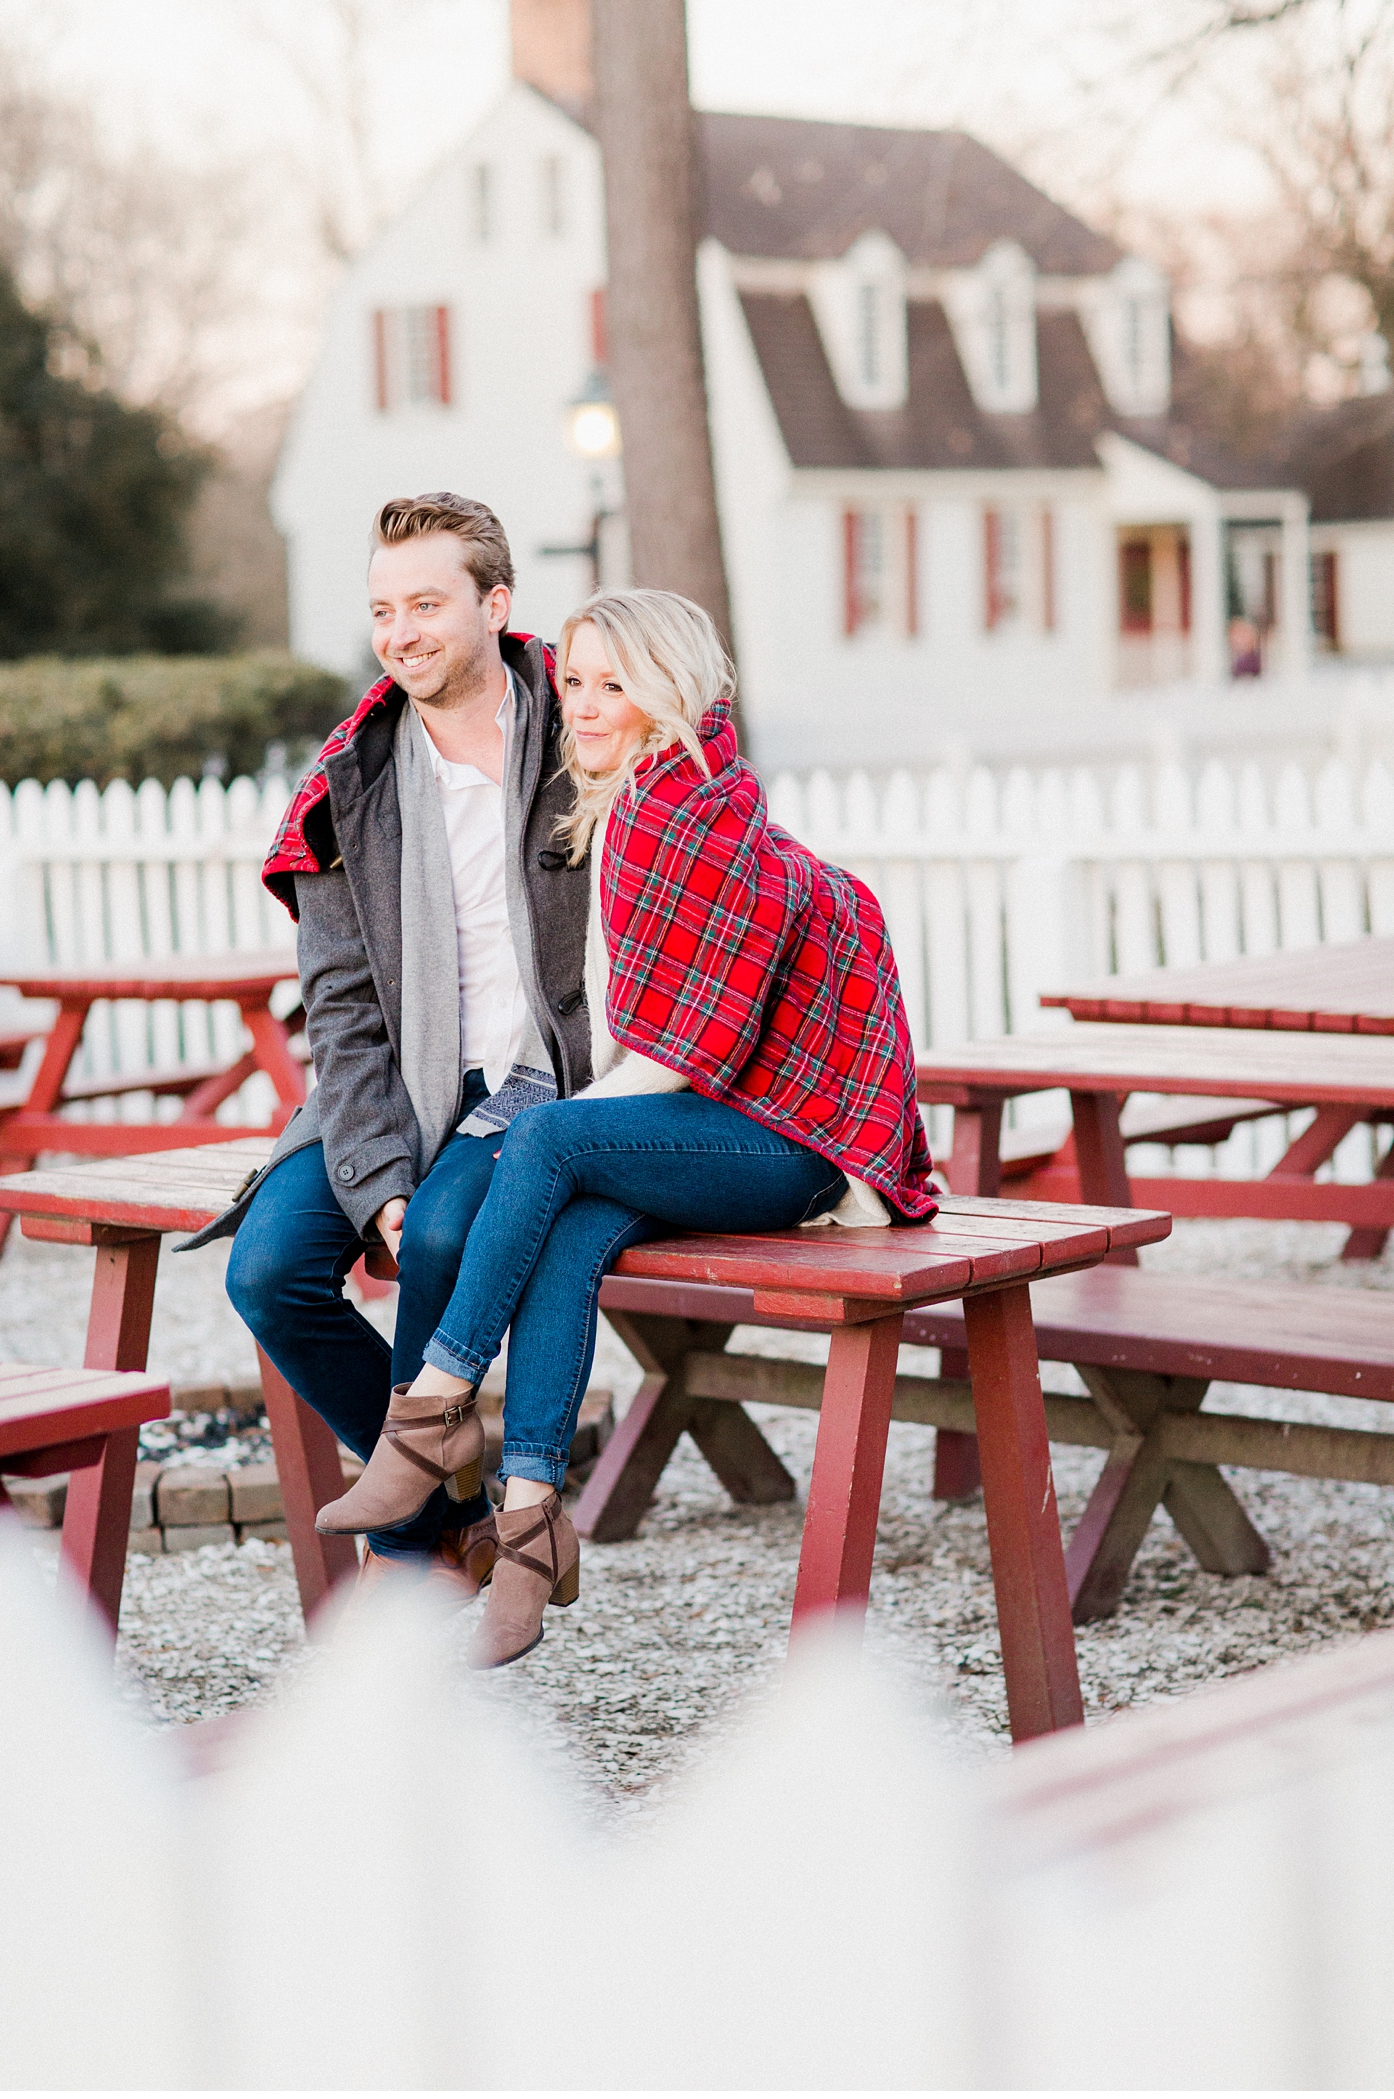 Cozy Winter Colonial Williamsburg Engagement Session by Alisandra Photography